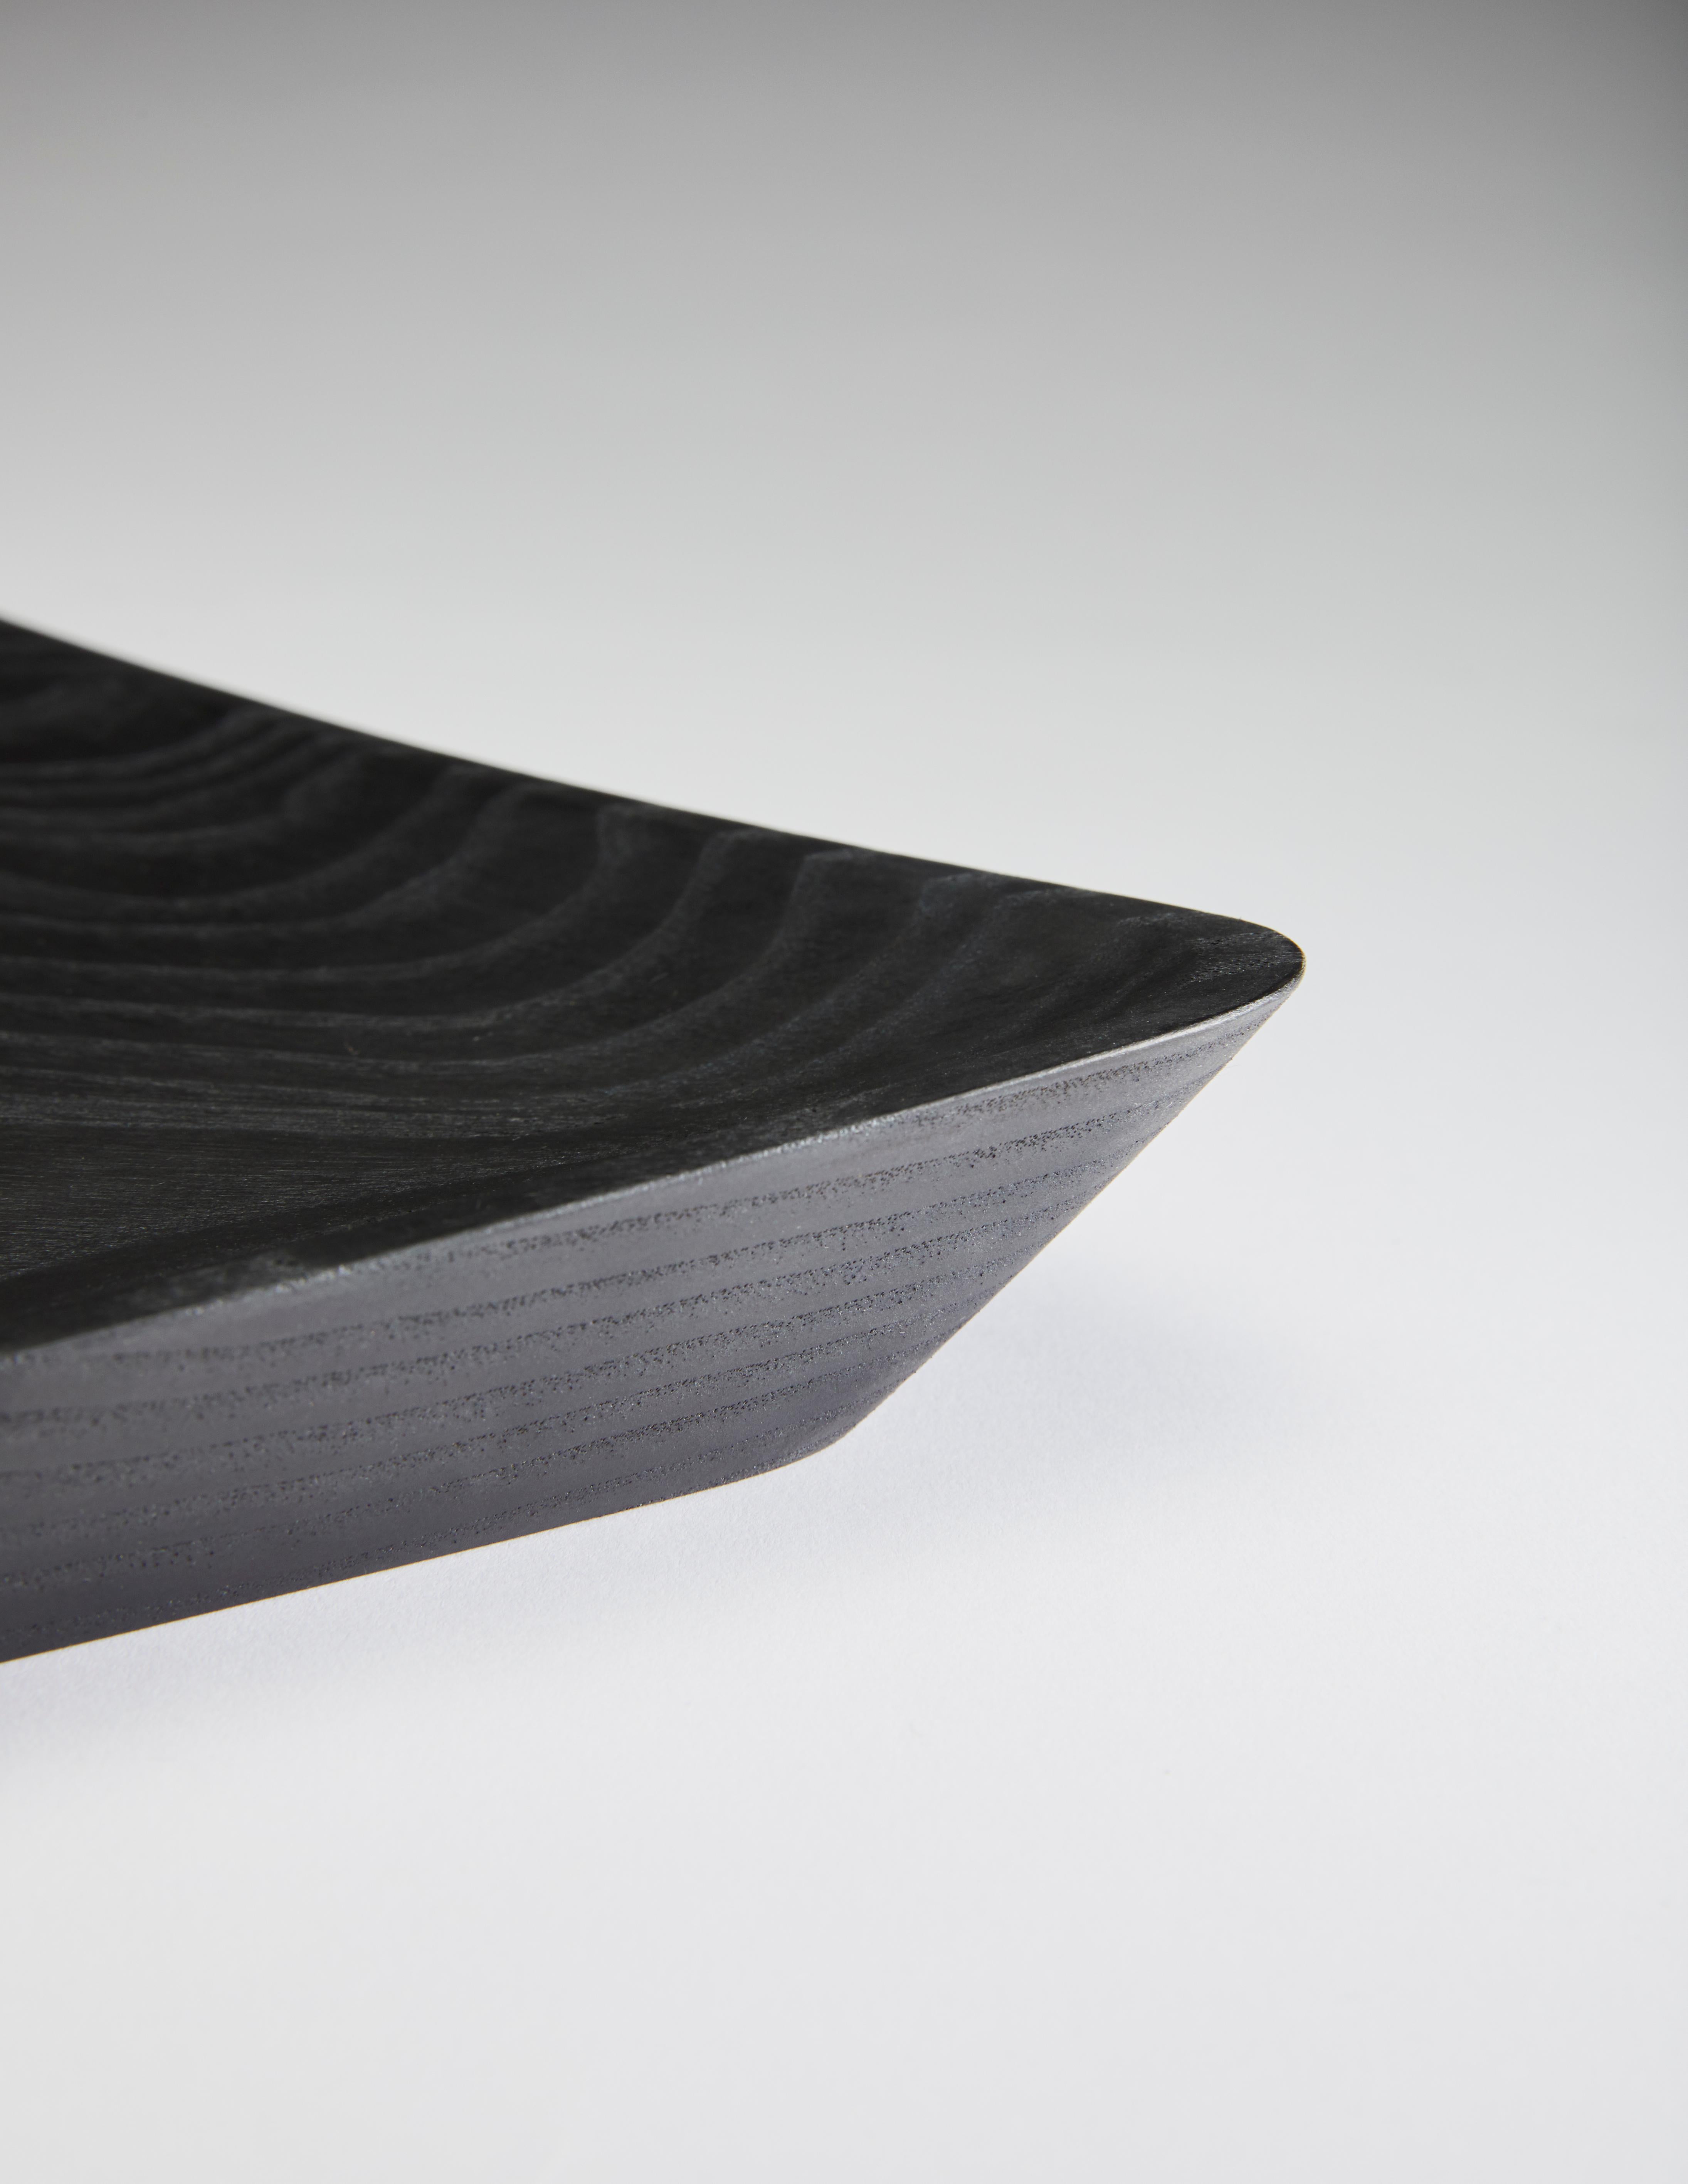 Medium Creux tray by Clemence Birot
Dimensions: 39 x 22 cm
Materials: ash (black stained).

Clemence Birot started her career in Copenhagen, Denmark, and discovered a design practice closely related to craftsmanship. The latter plays an